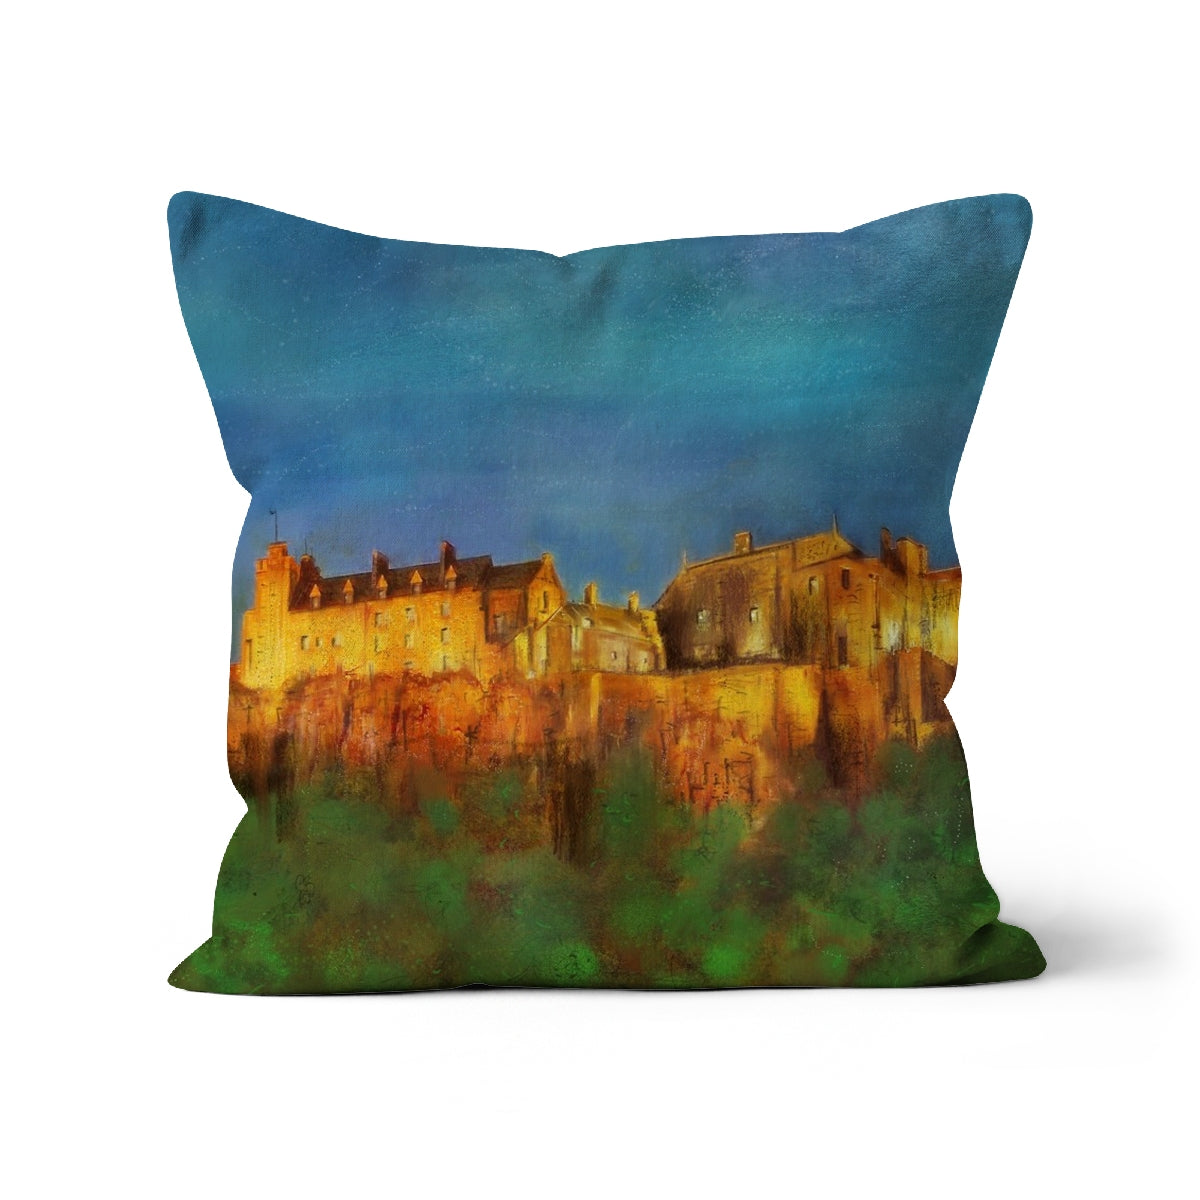 Stirling Castle Art Gifts Cushion-Cushions-Historic & Iconic Scotland Art Gallery-Linen-22"x22"-Paintings, Prints, Homeware, Art Gifts From Scotland By Scottish Artist Kevin Hunter